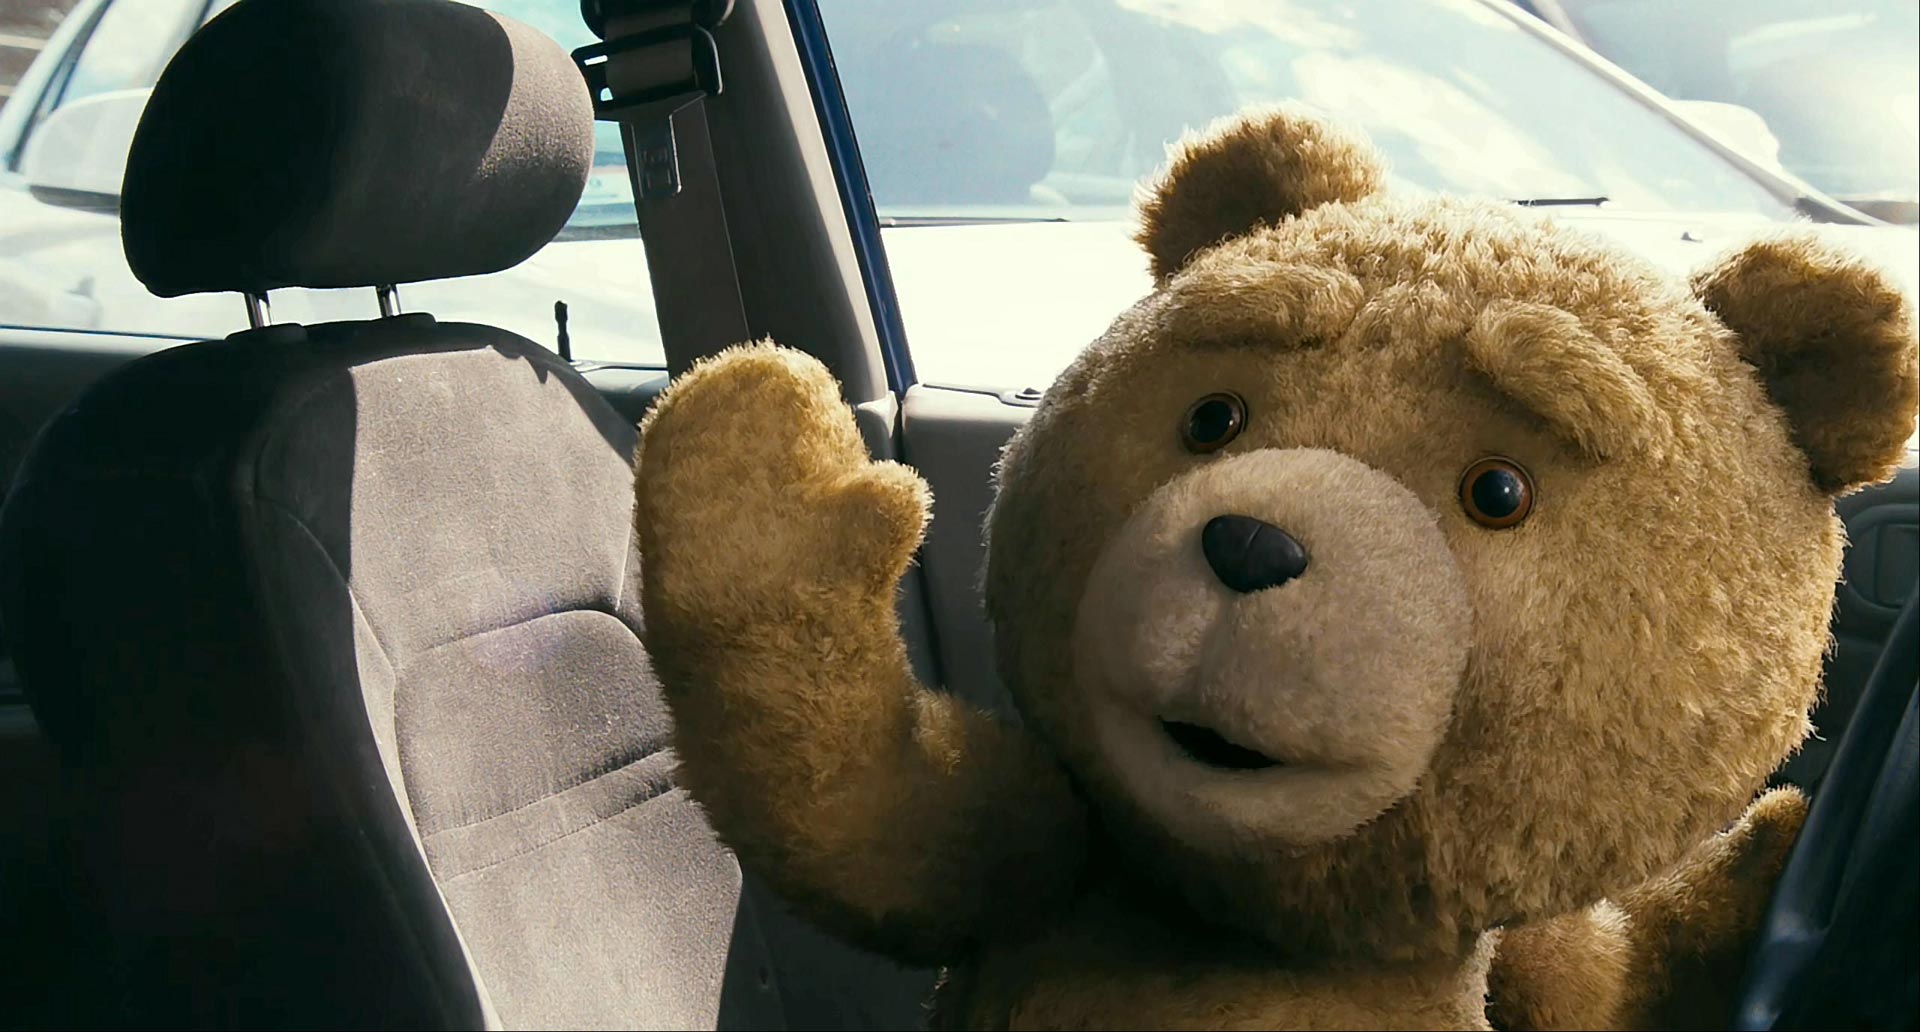 Ted Film